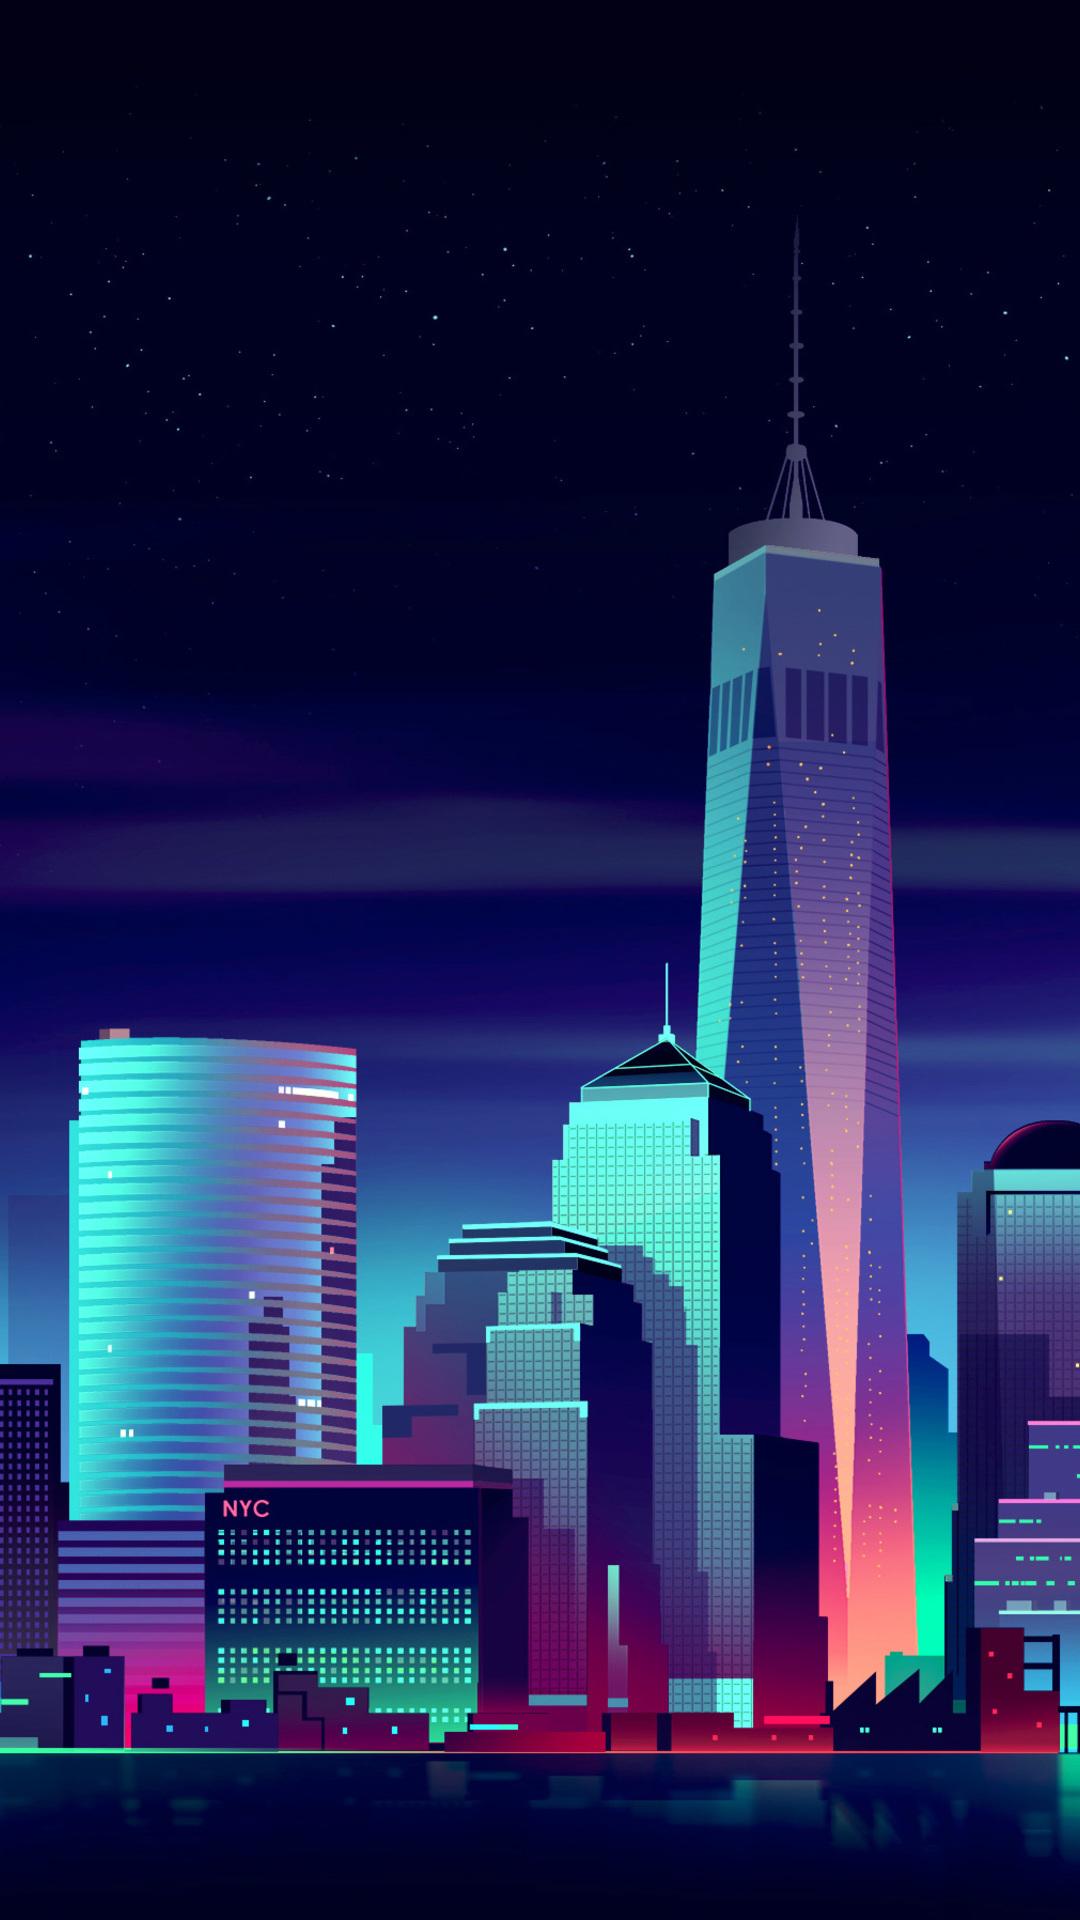 Any other pixel city night wallpaper like this one for phones